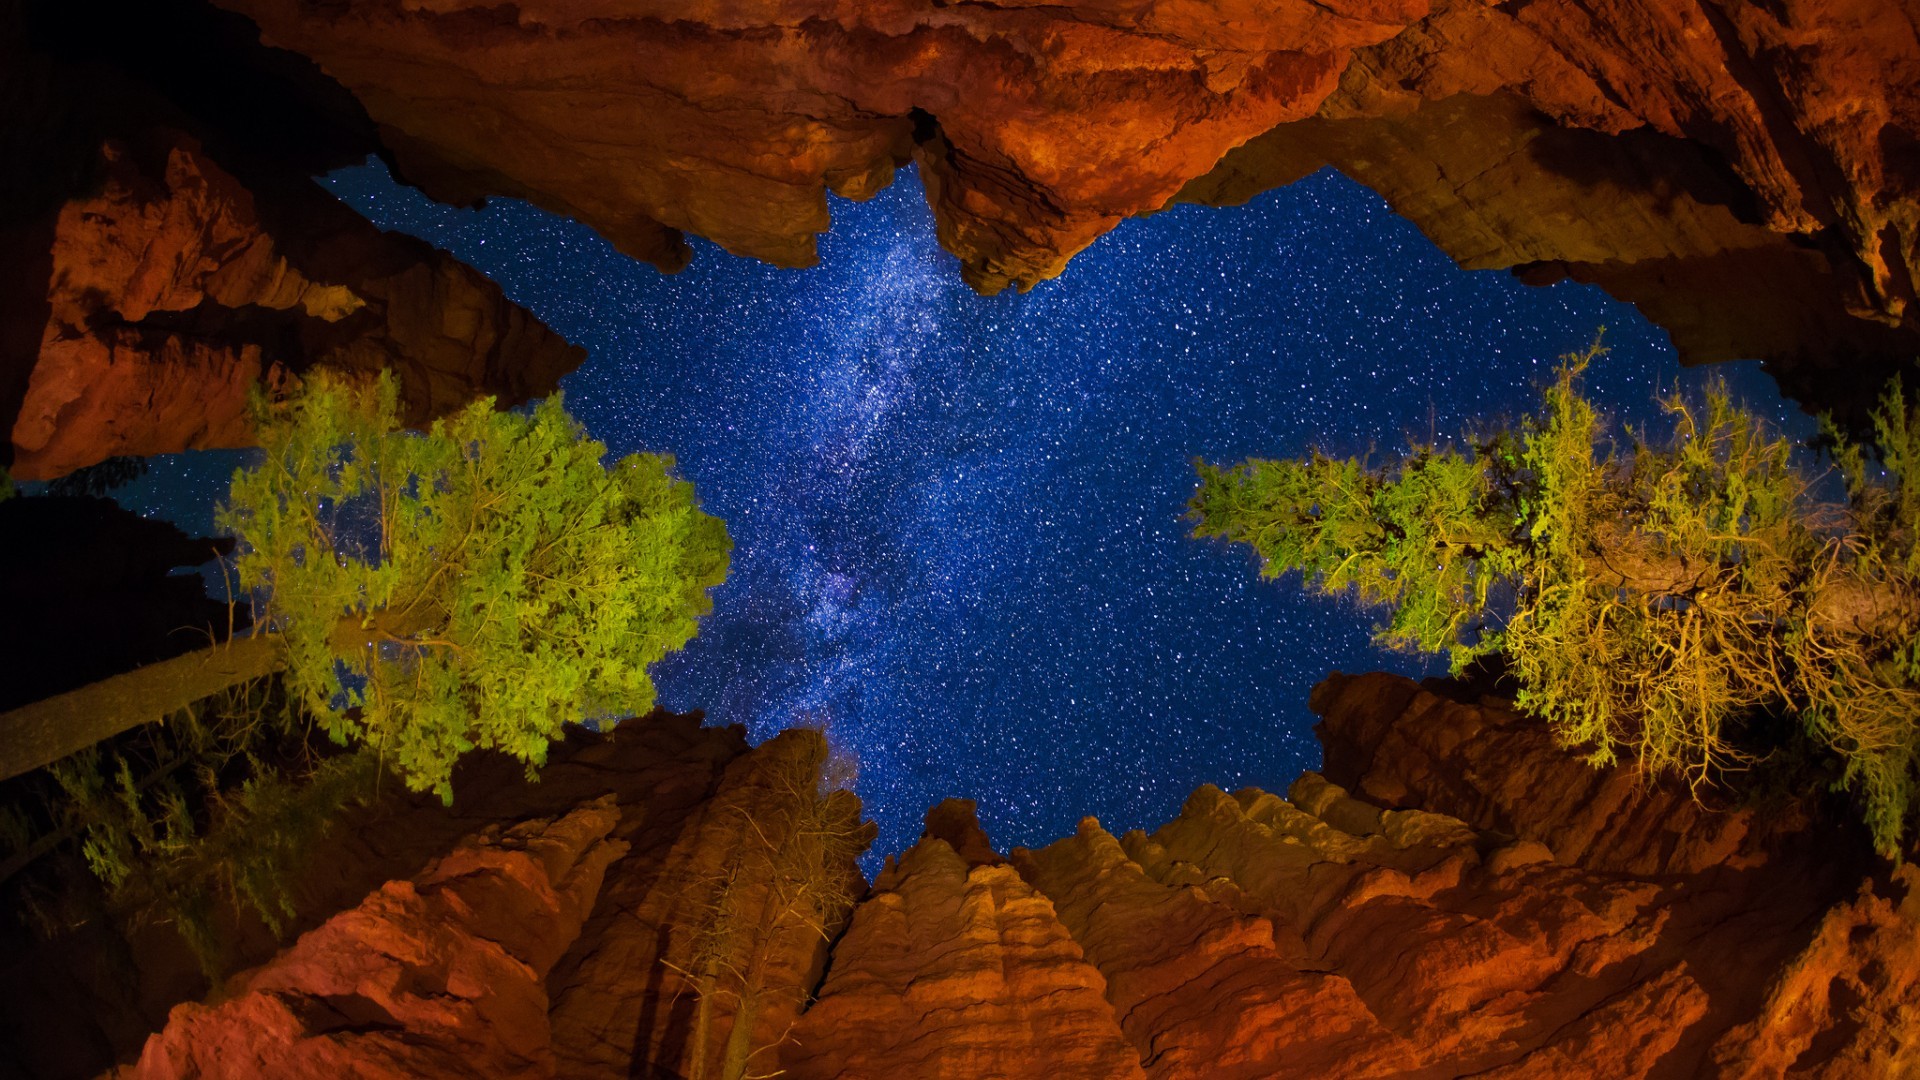 General 1920x1080 worm's eye view clouds nature night sky stars Milky Way national park Utah USA trees mountains rocks valley bottom view